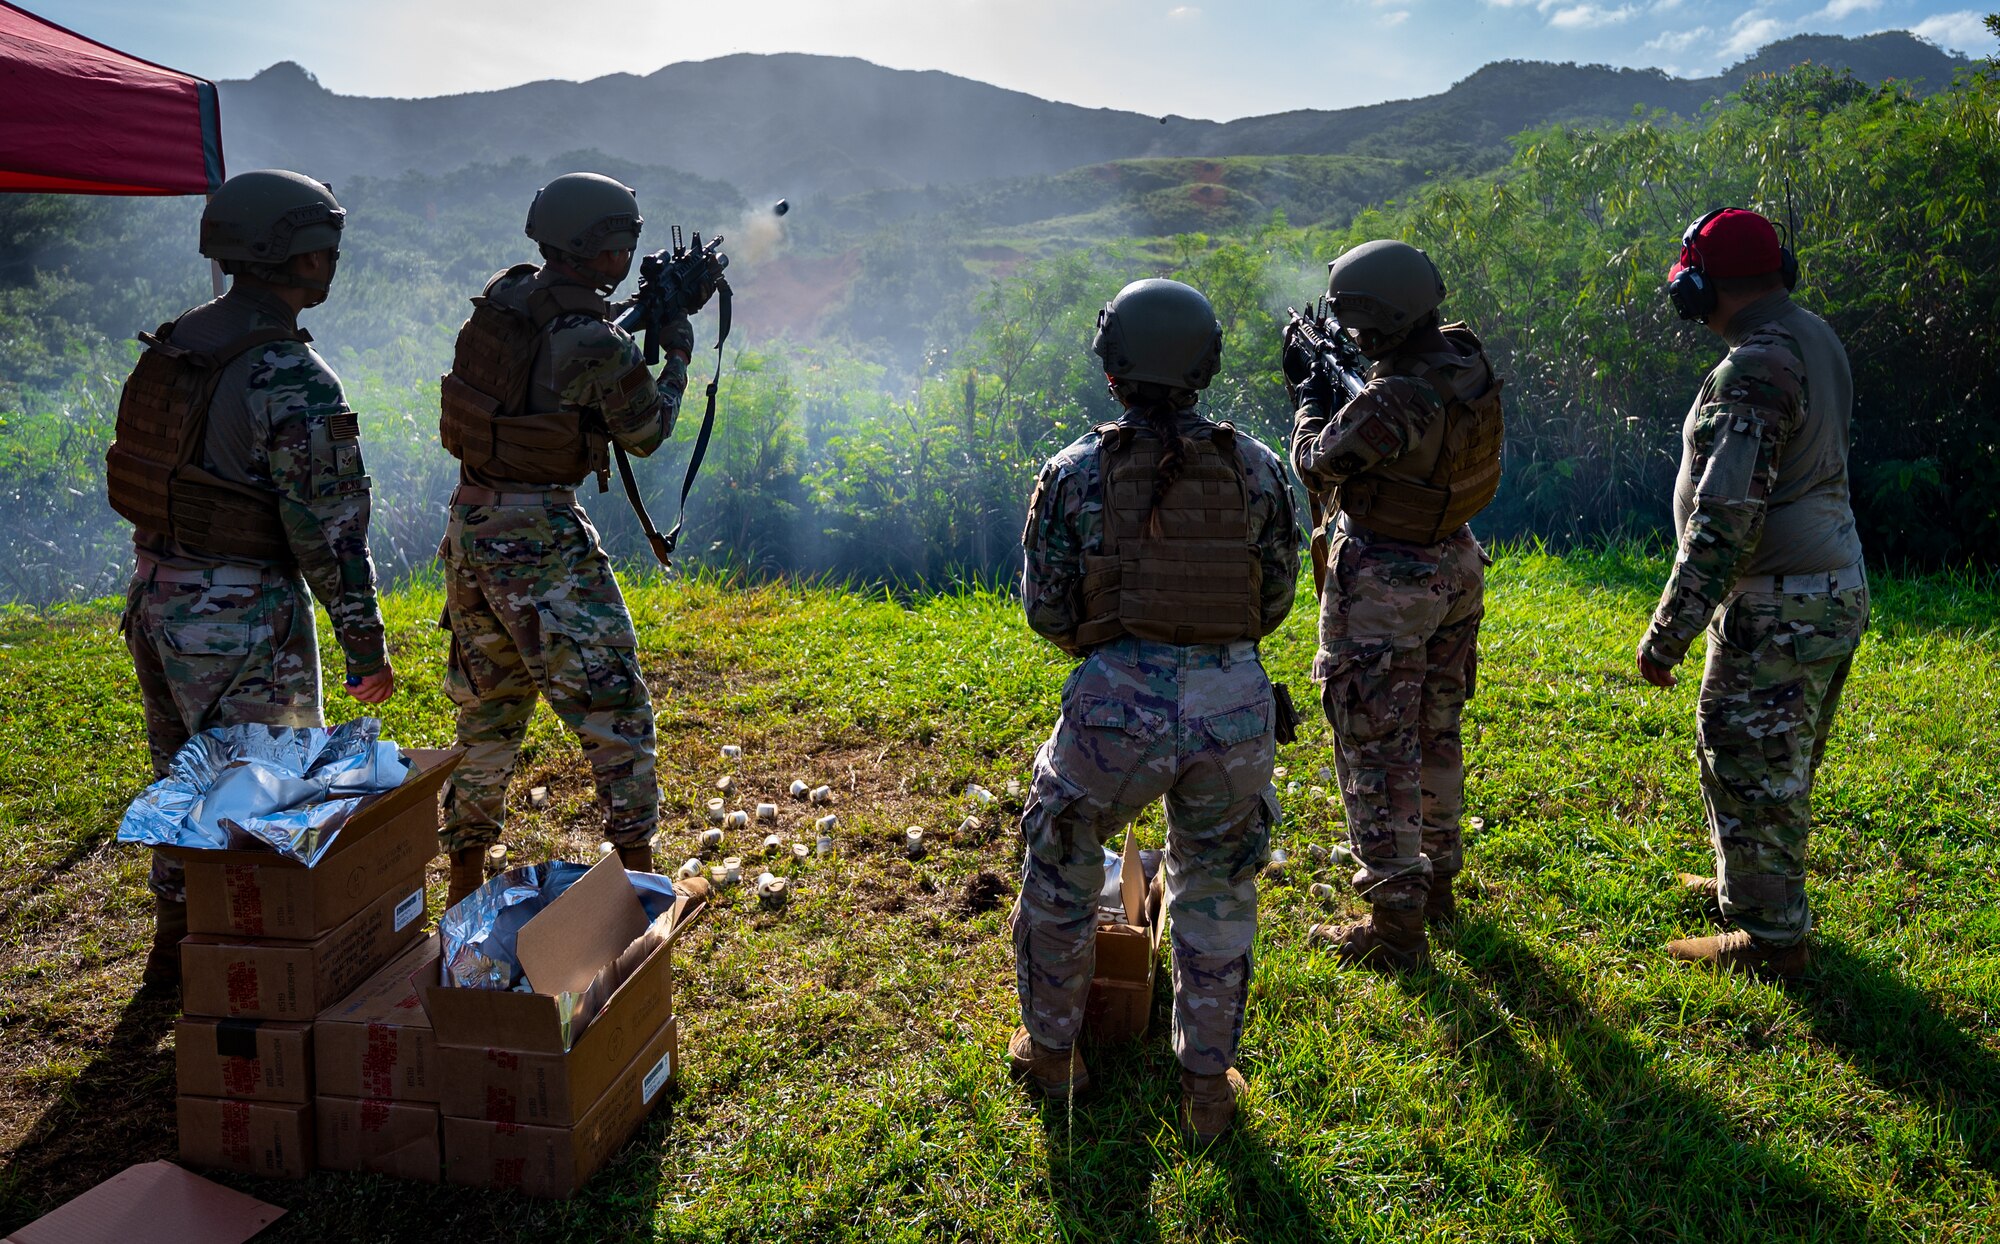 Members from the 18th Security Forces Squadron fire M203 grenade launchers at Camp Hansen, Japan, Sept. 30, 2021. The M203 grenade launcher is a rifle-mounted launcher capable of firing 40 mm rounds. (U.S. Air Force photo by Airman 1st Class Stephen Pulter)